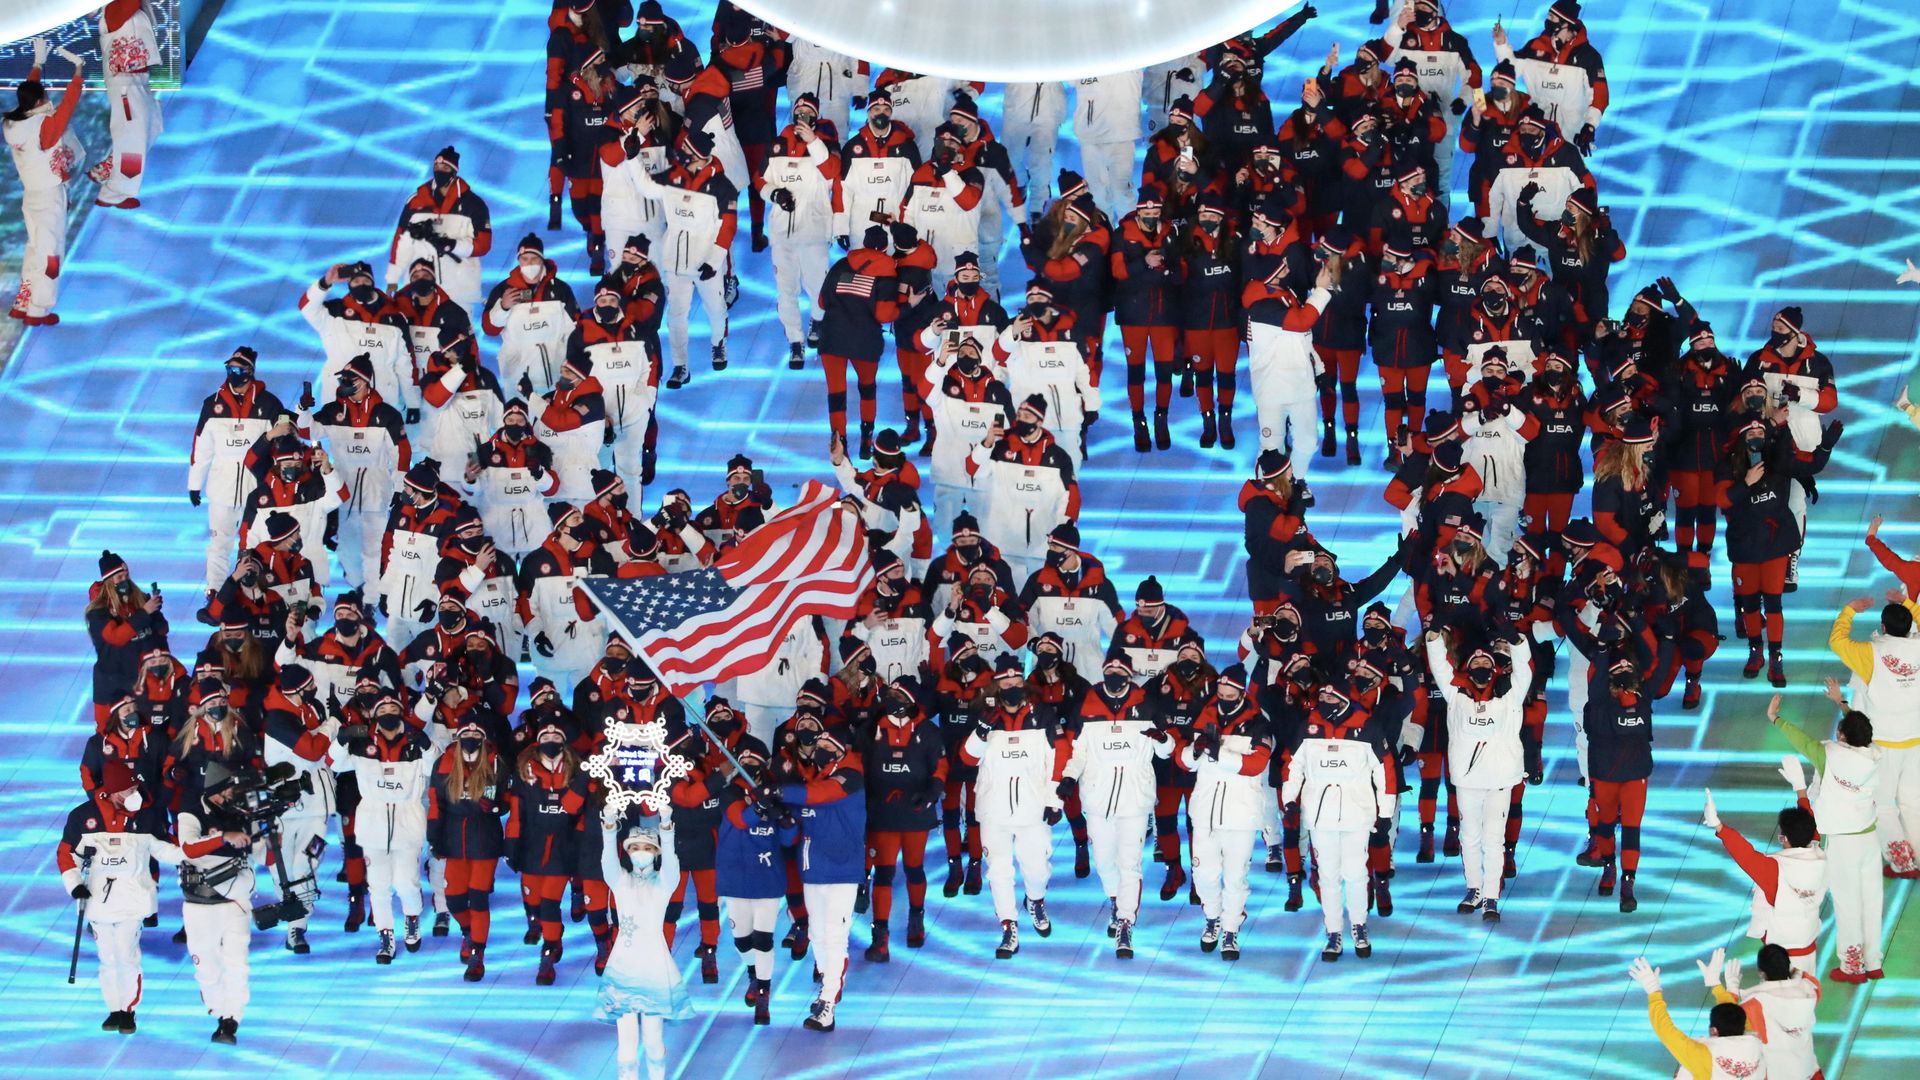 Team USA at the opening ceremony in Beijing